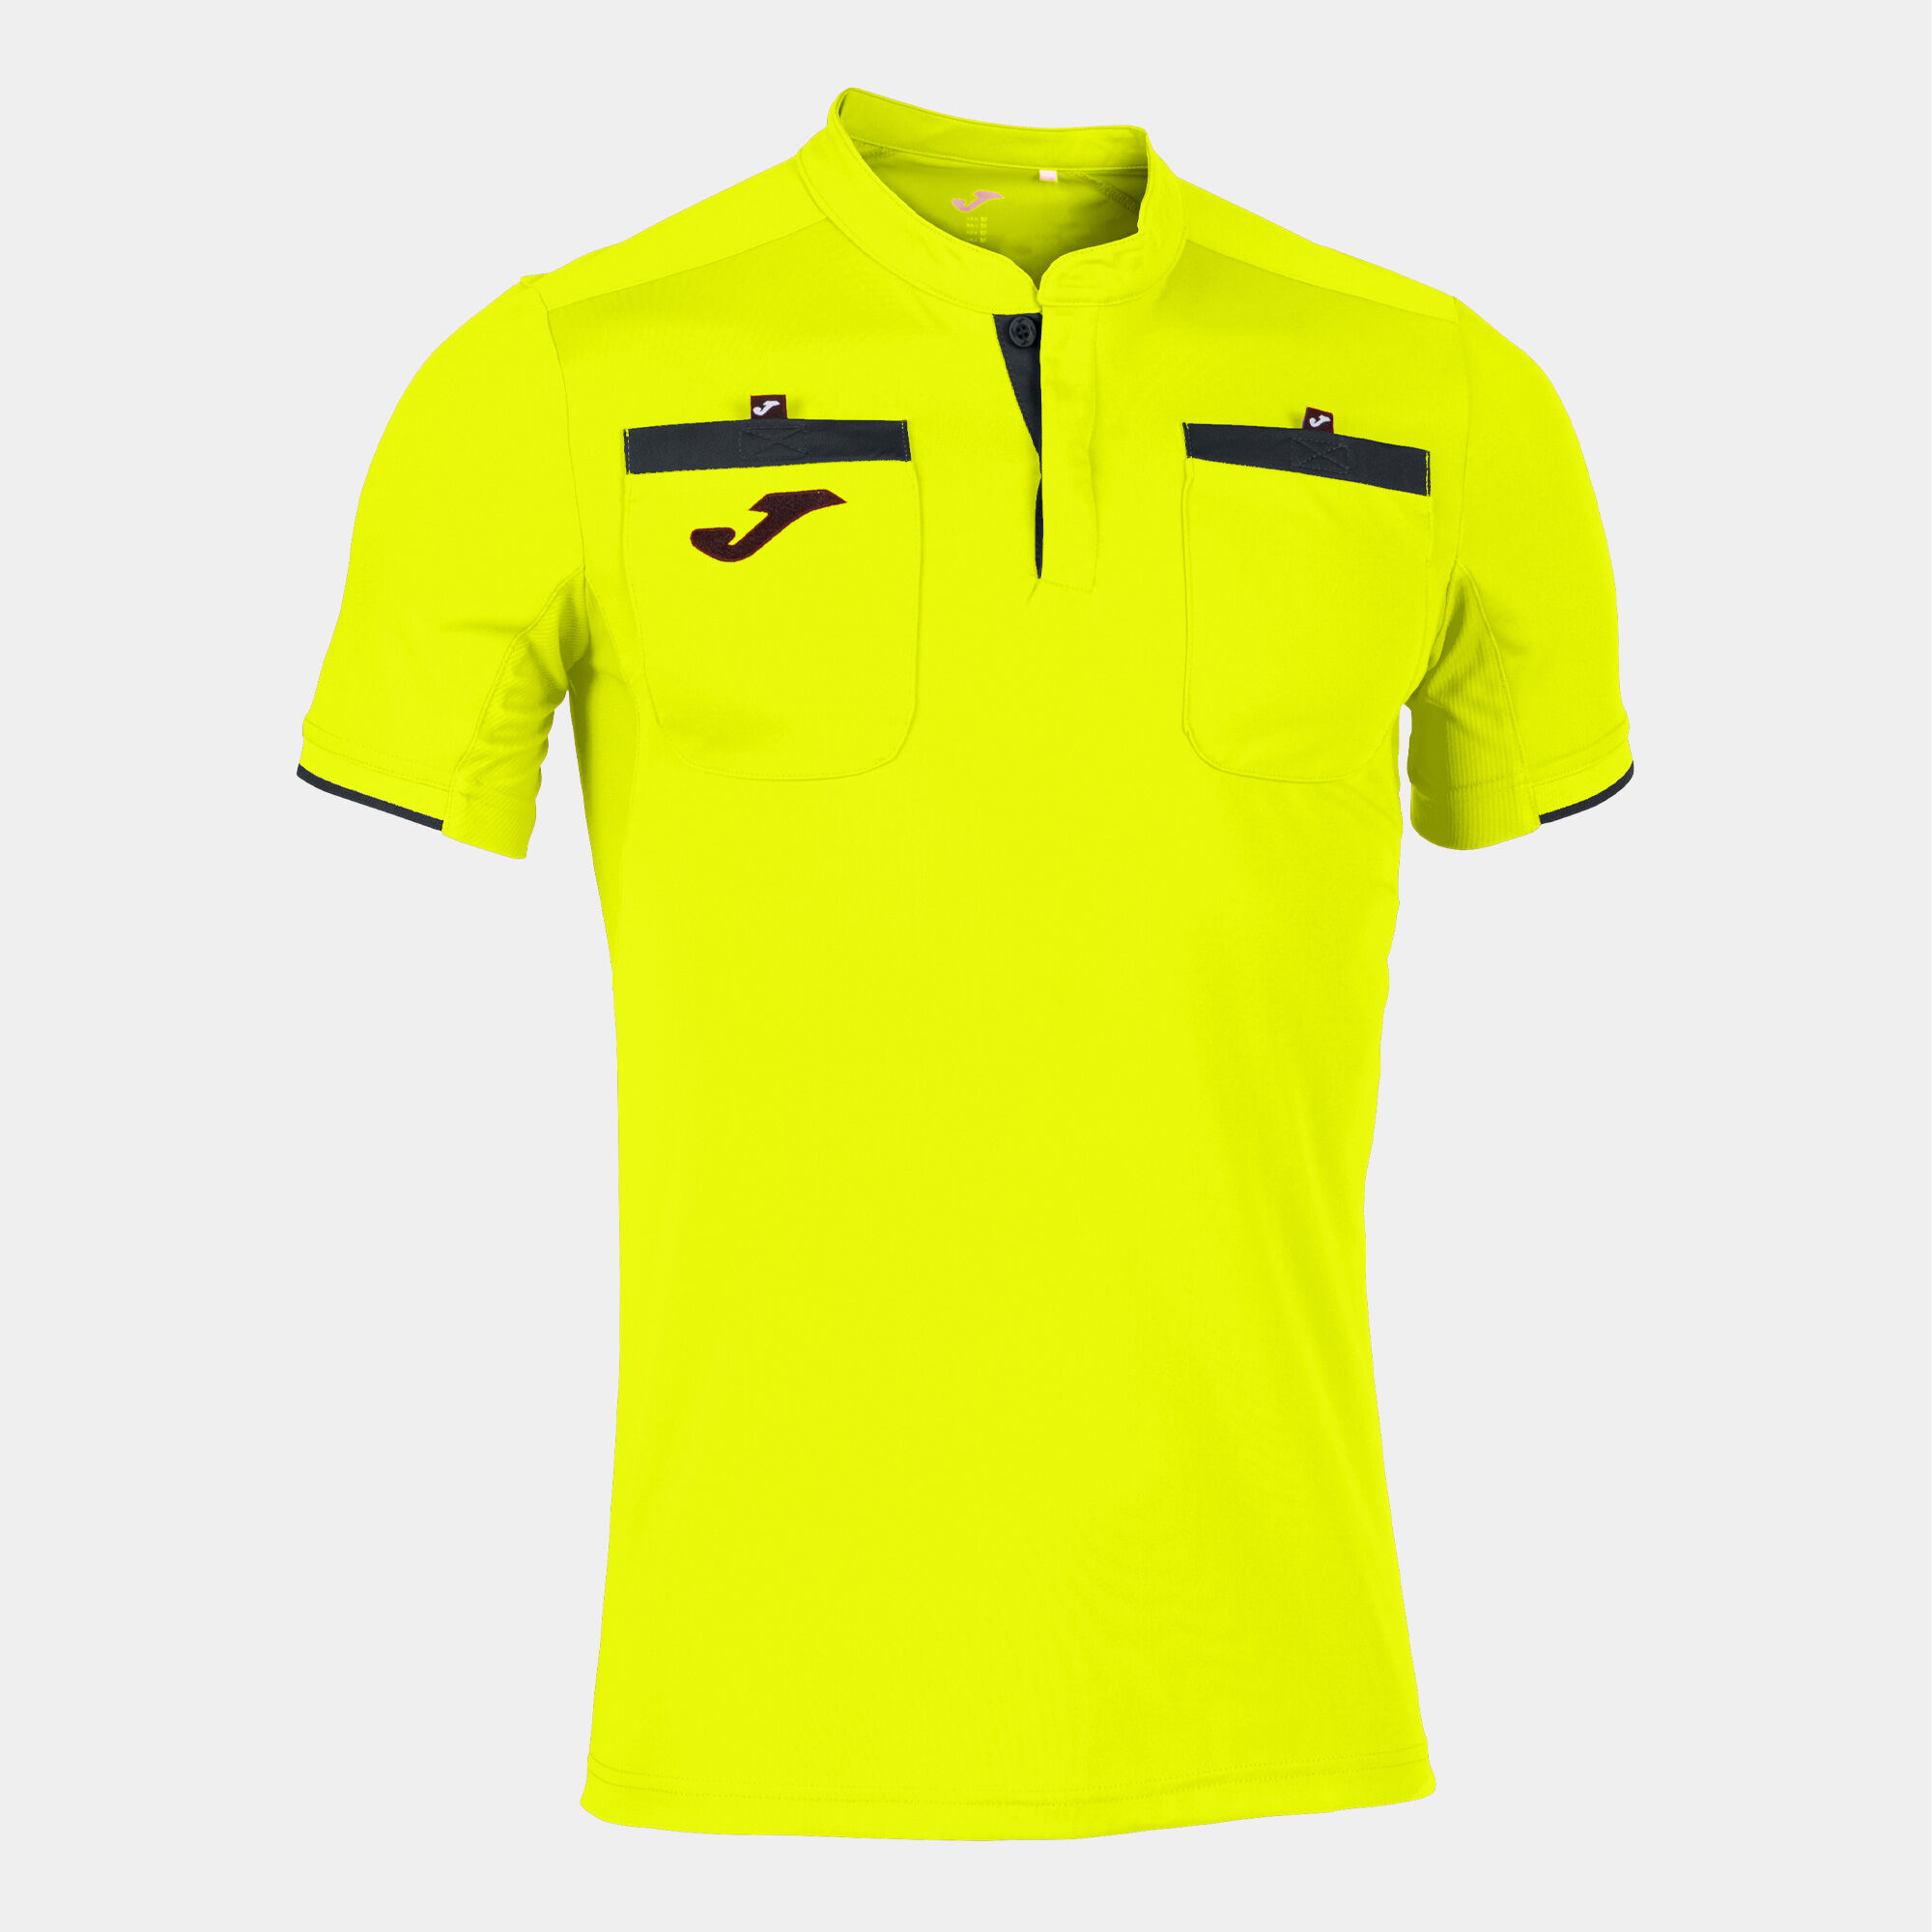 MAILLOT MANCHES COURTES HOMME REFEREE JAUNE FLUO